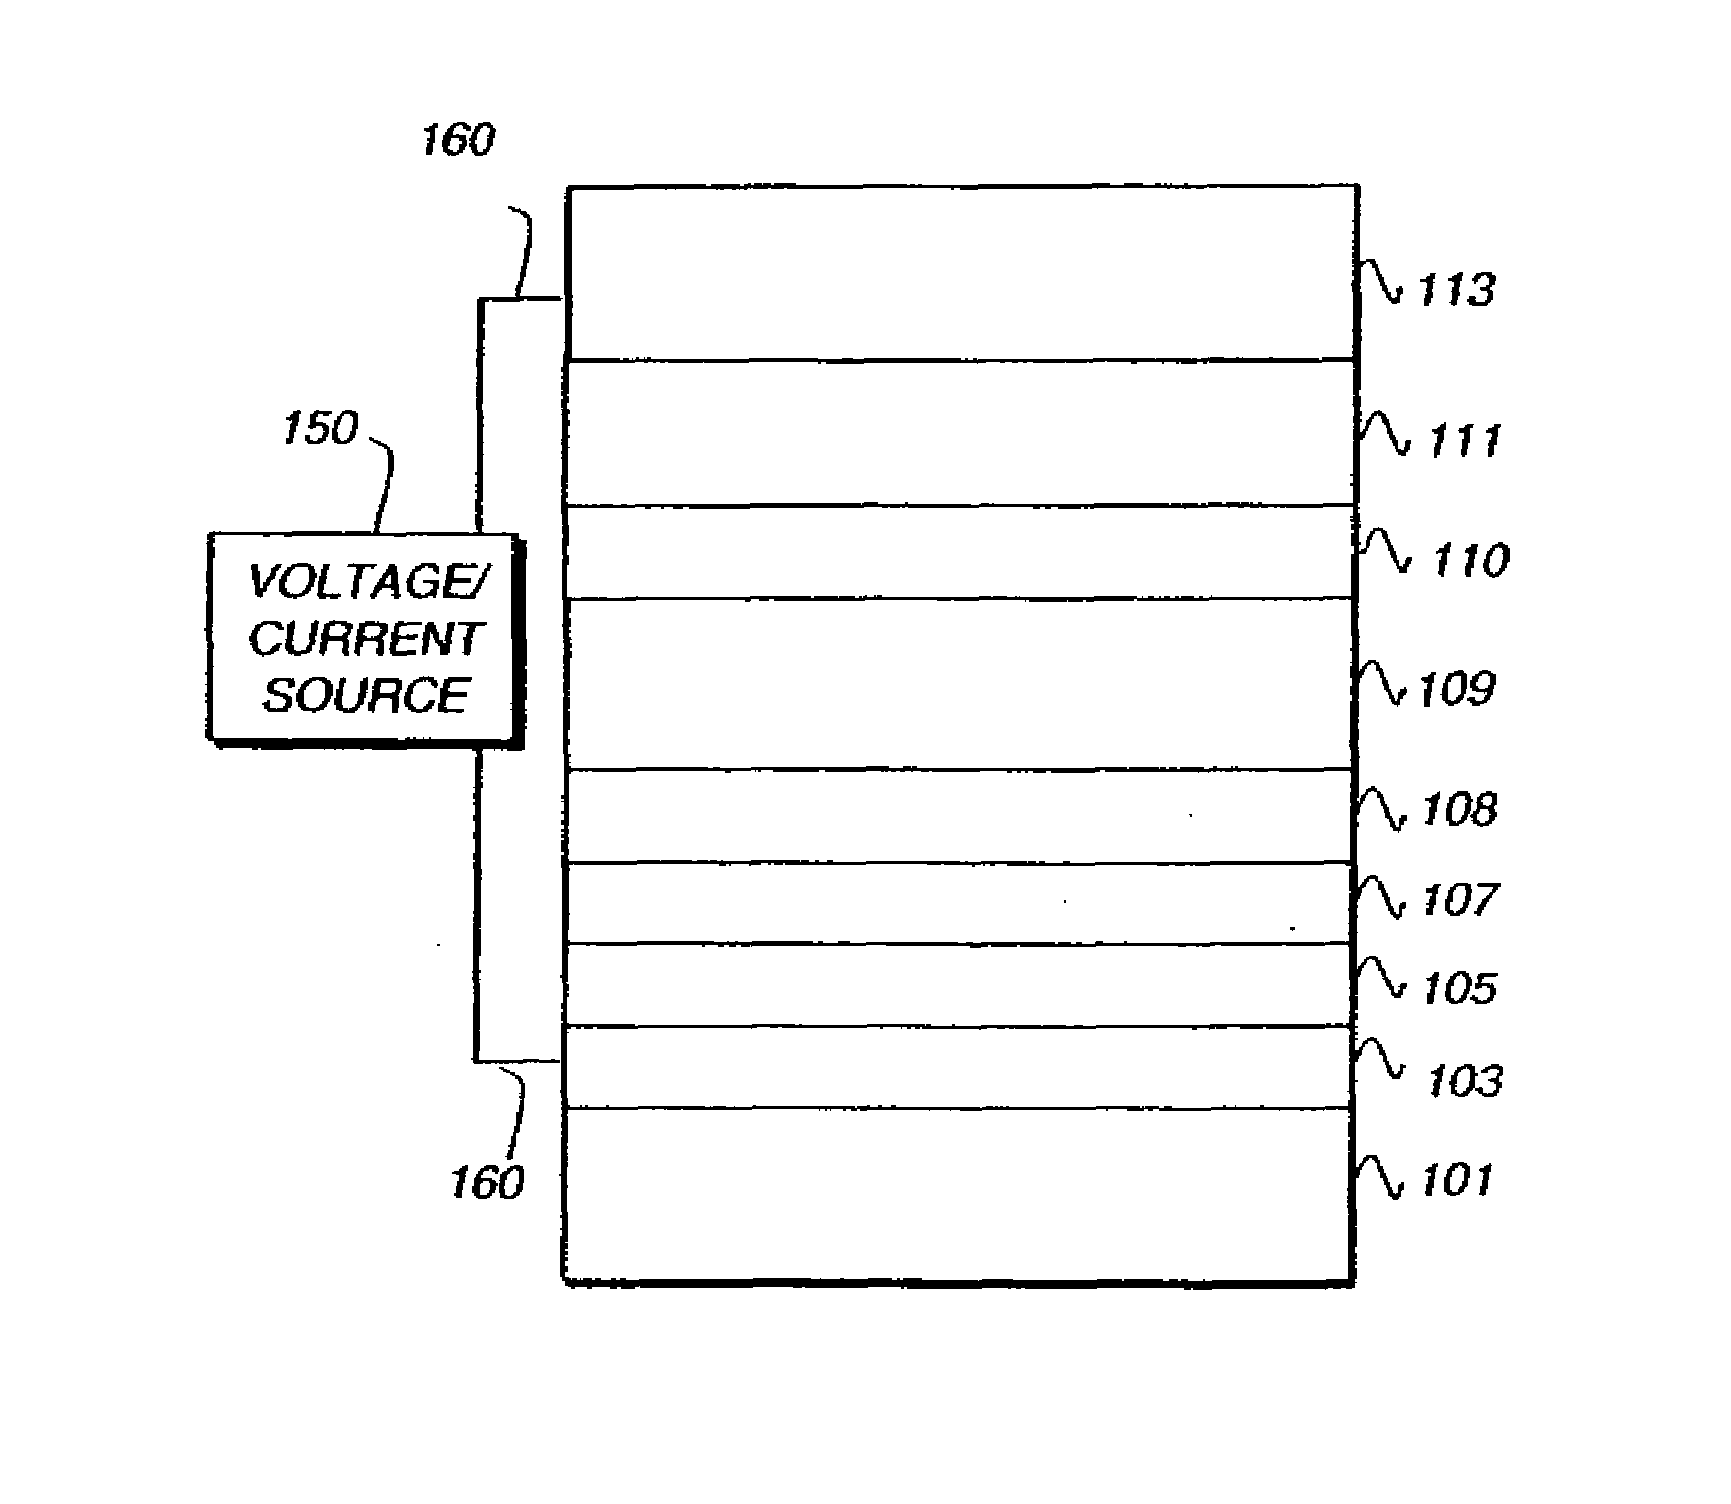 Phosphorescent OLED device with mixed hosts